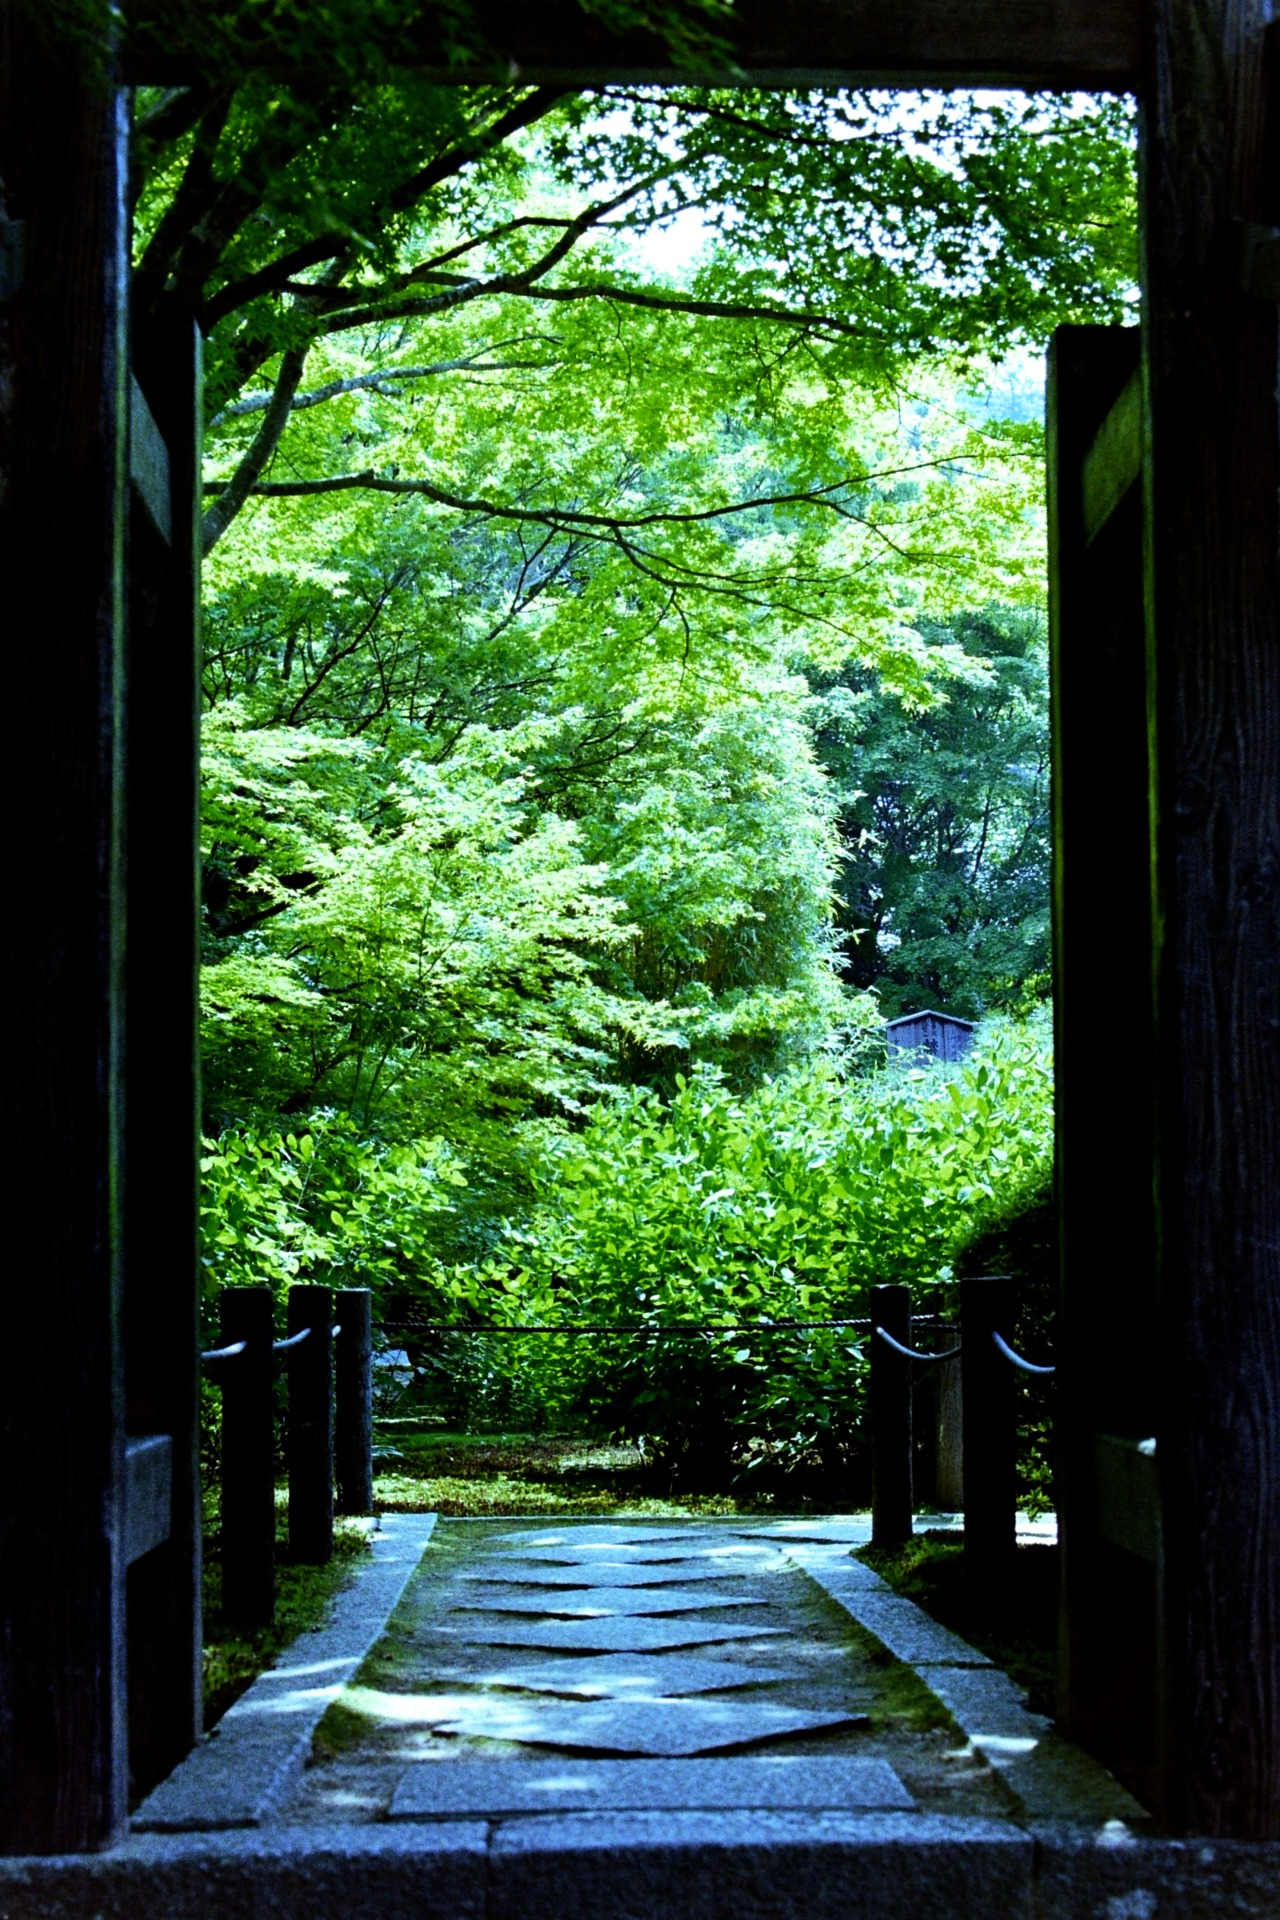 totophotopot:
“ by NikonFM3A
in Kyoto Japan
”